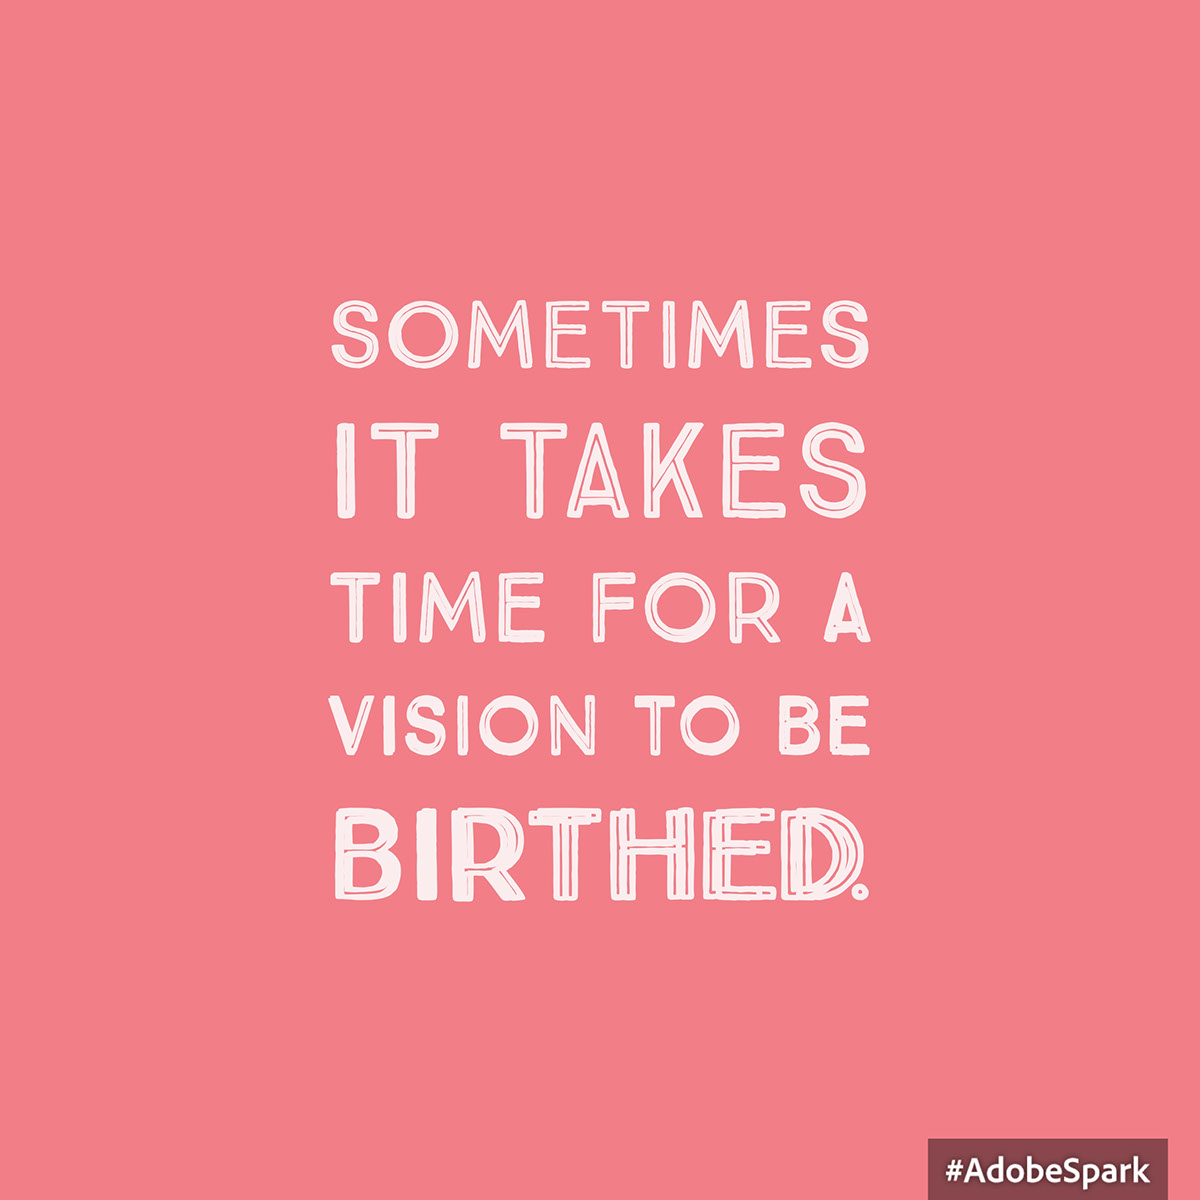 Sometimes it takes time for a vision to be birthed. Sometimes it takes time for a vision to be birthed. 
Sometimes it takes time for a vision to be birthed